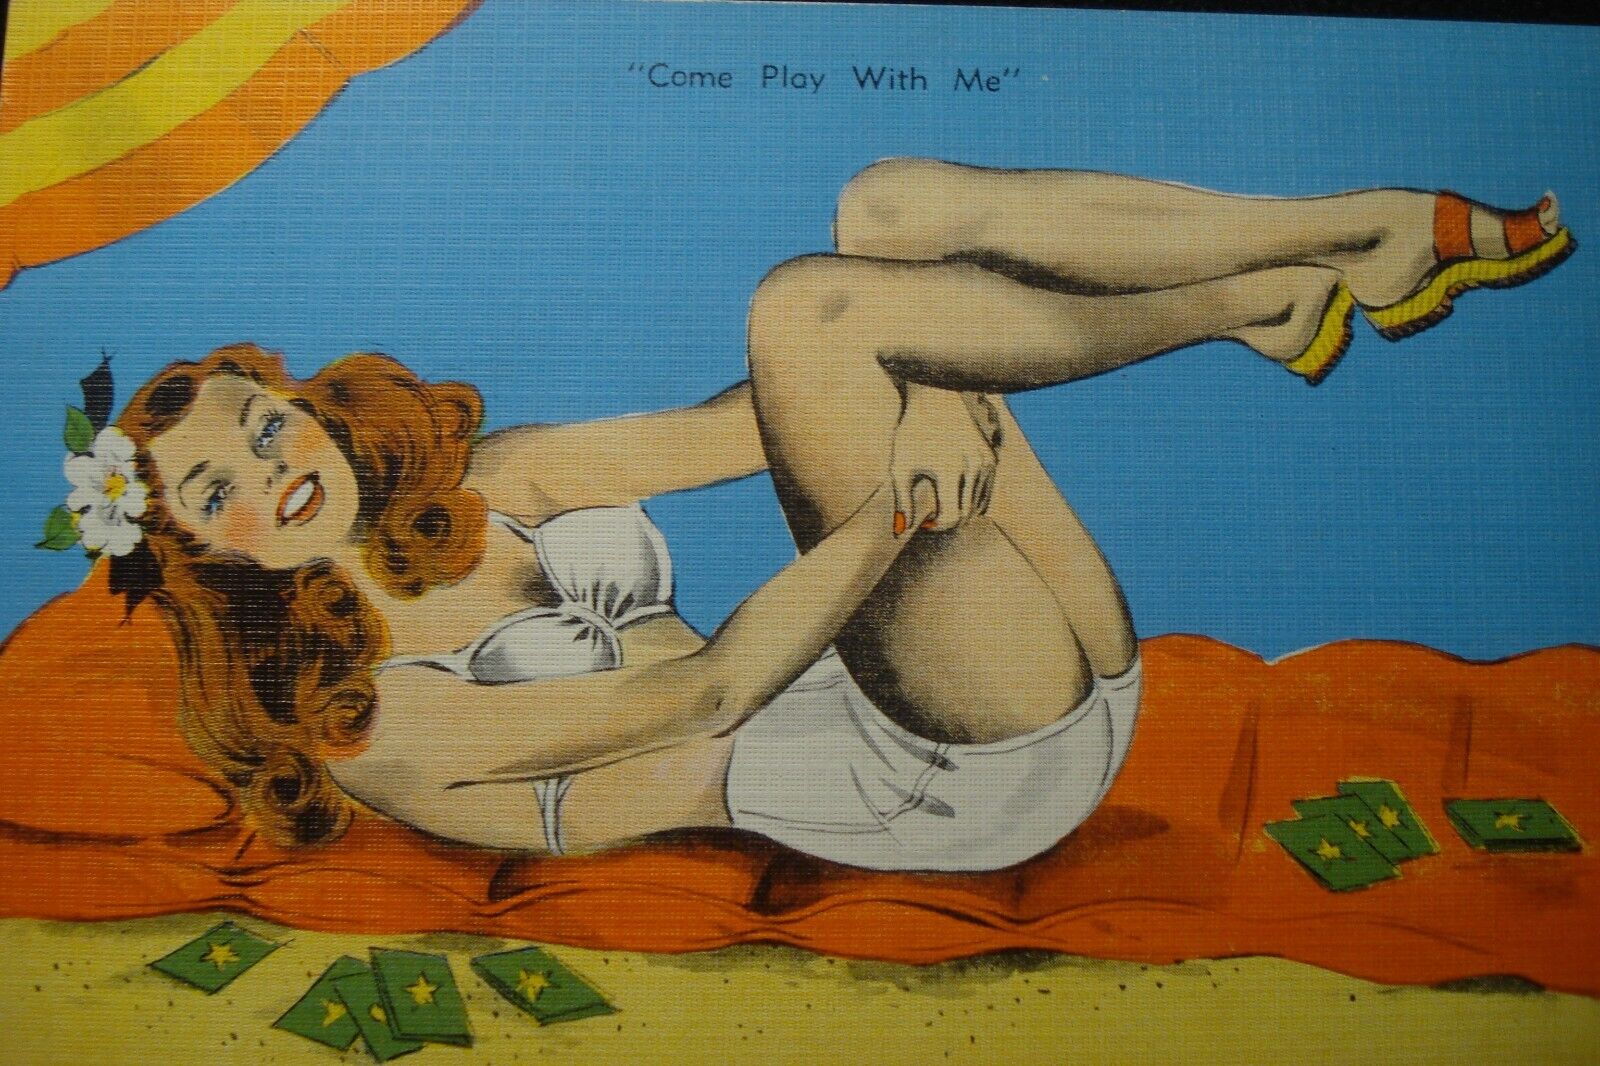 VTG LINEN RISQUE PINUP GIRL POSTCARD - COME PLAY WITH ME, PLAYING CARDS